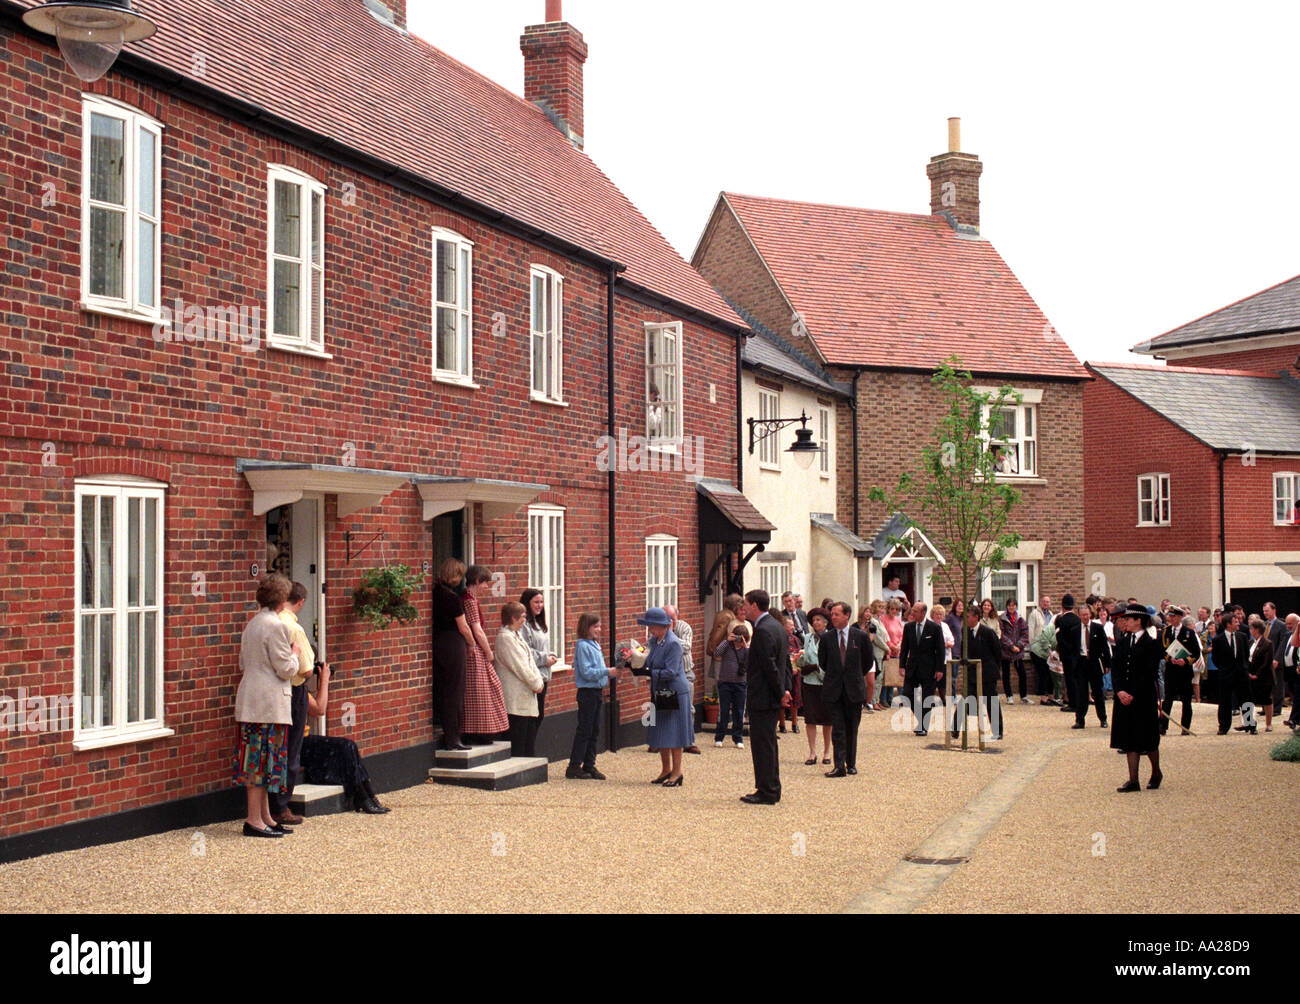 Queen Elizabeth II during a visit to her son s Poundbury Village project Stock Photo